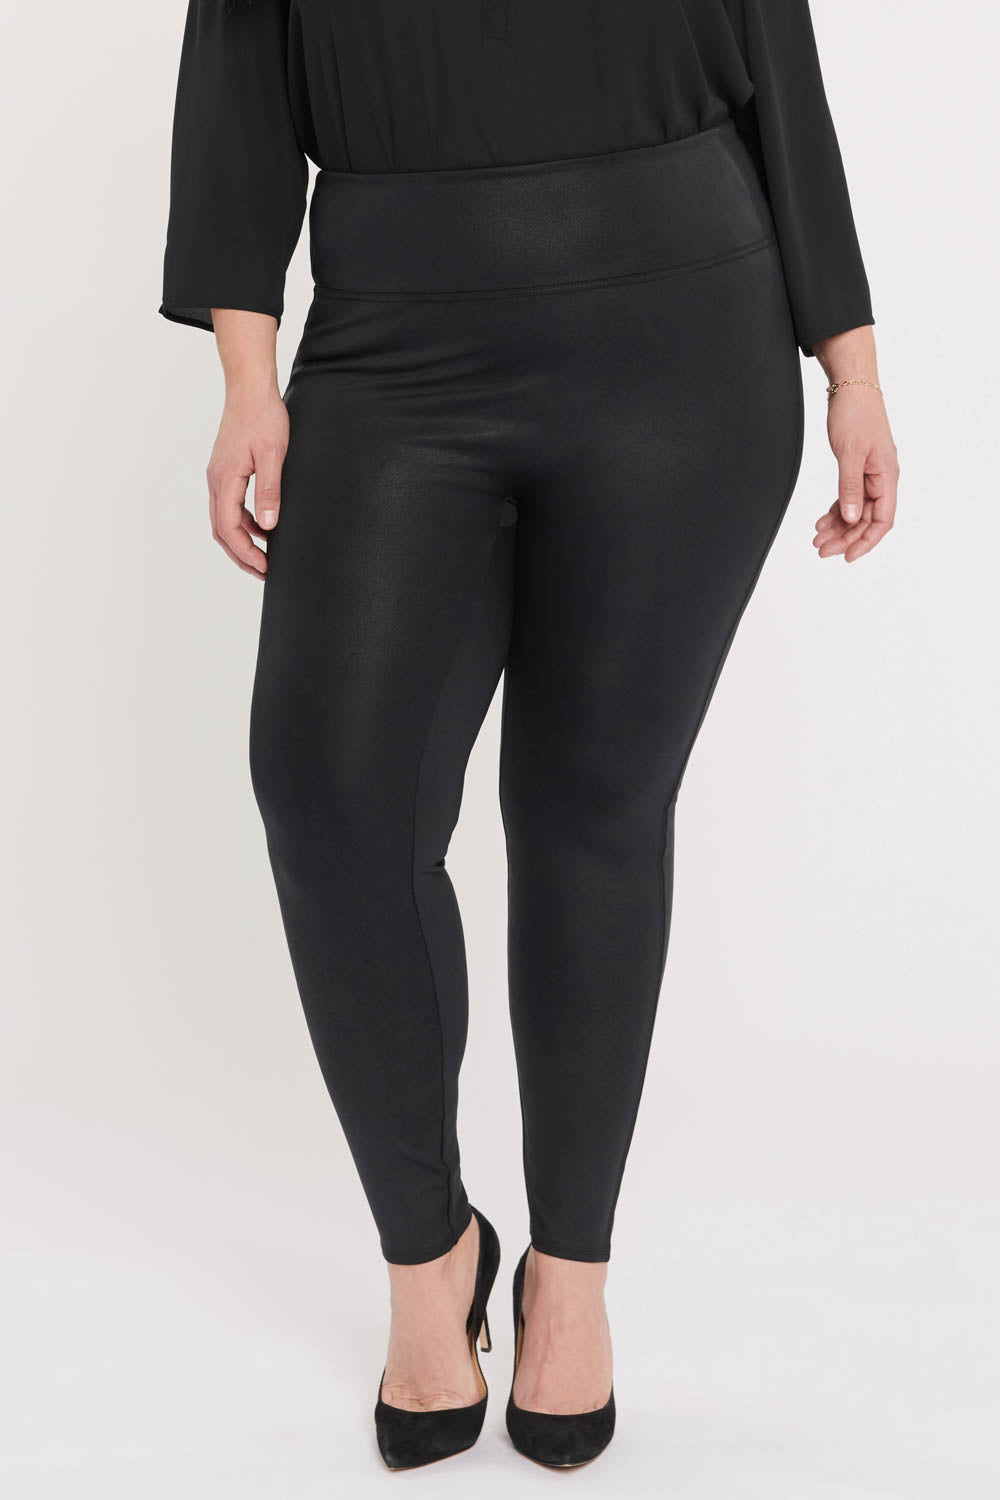 Pull-On Skinny Legging Pants In Plus Size Sculpt-Her™ Collection - Jet ...